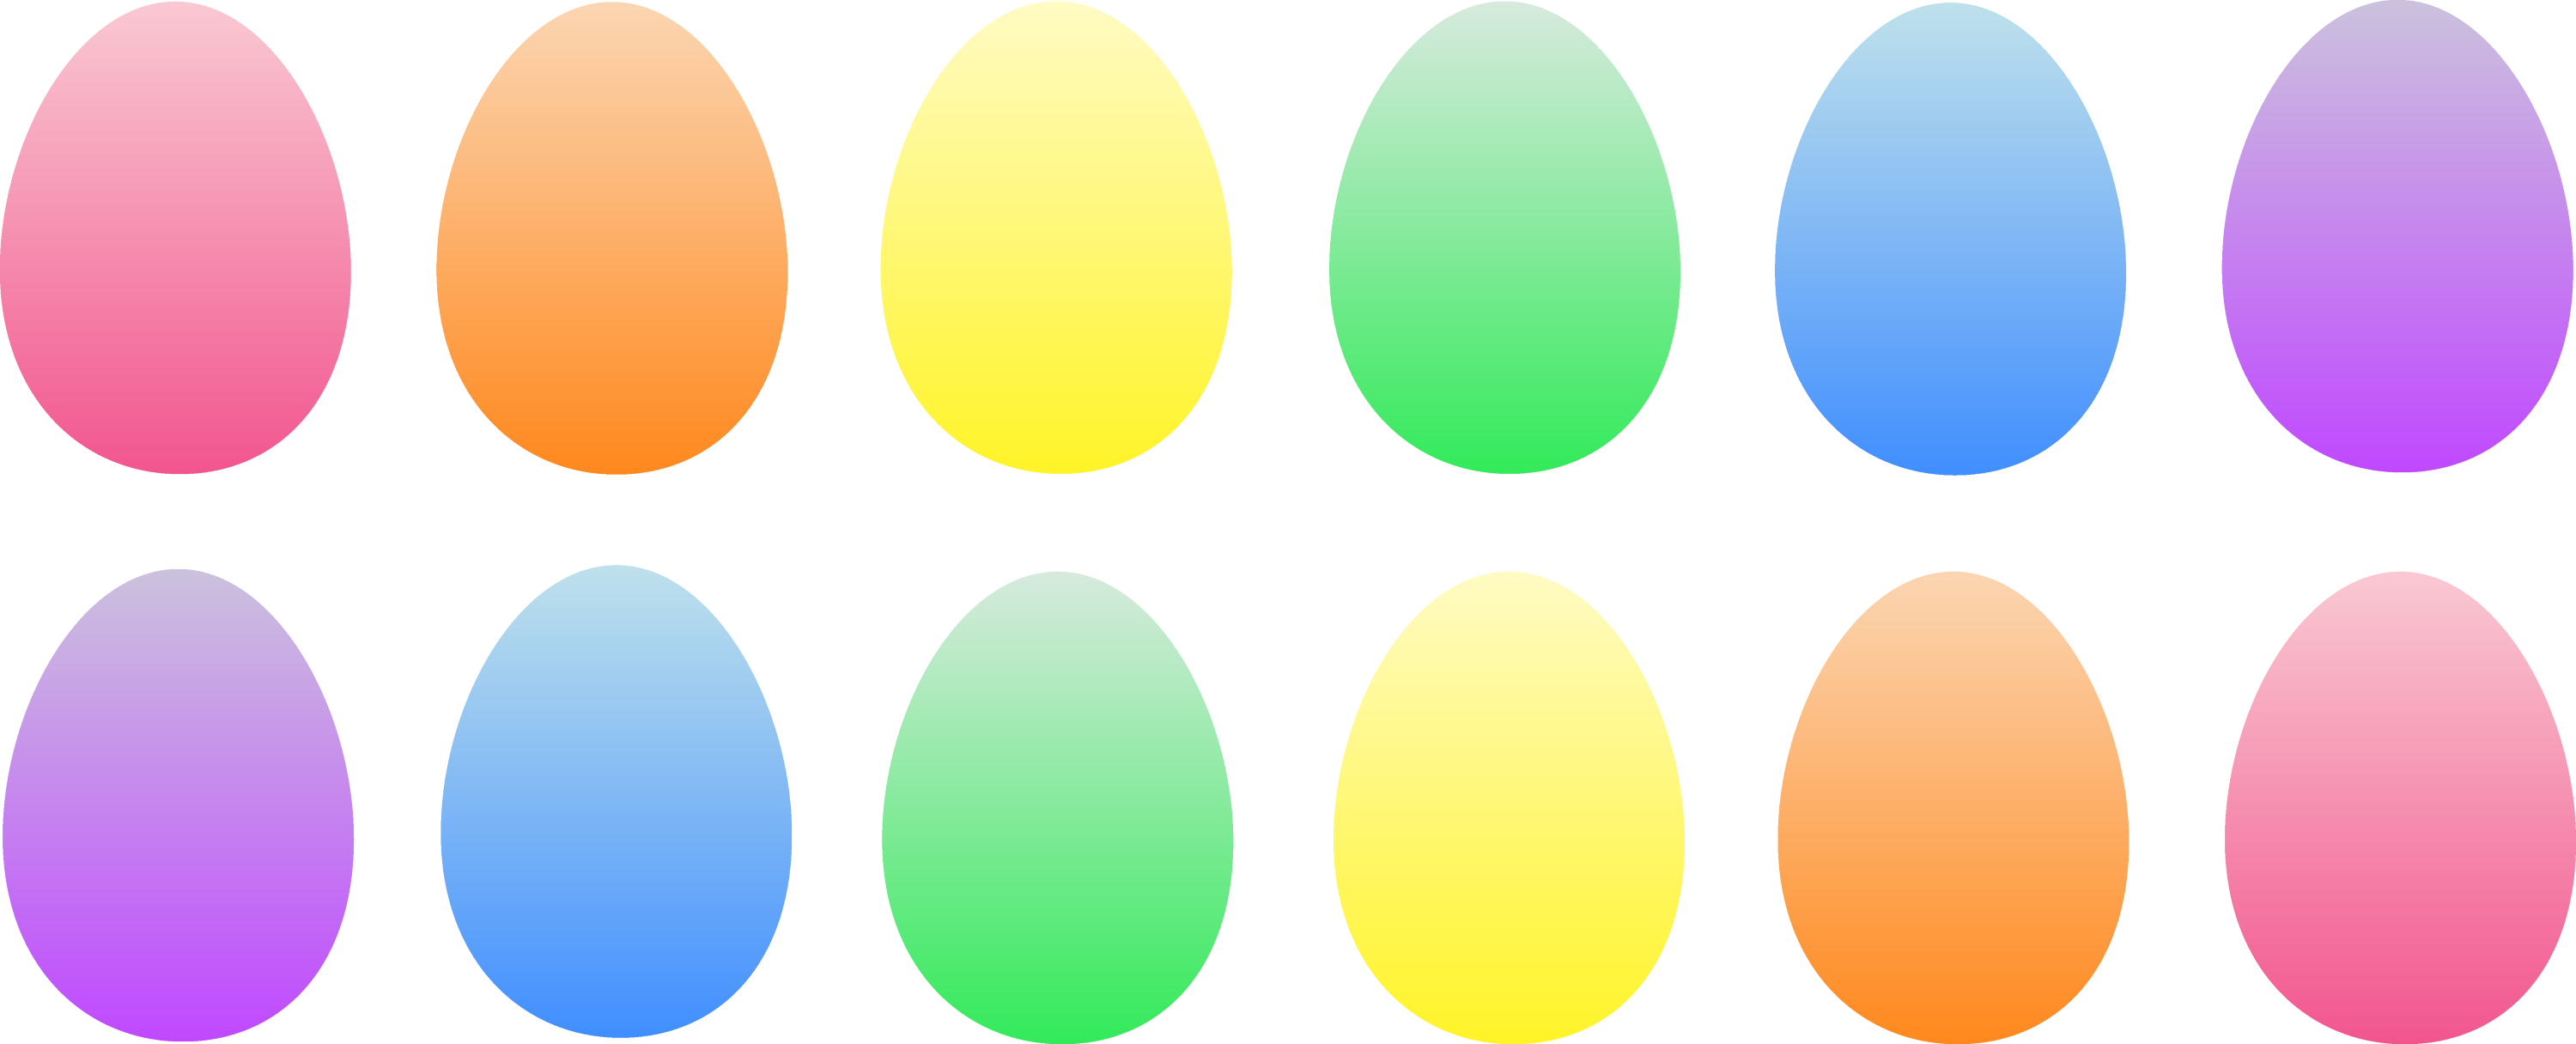 free clip art for easter eggs - photo #44